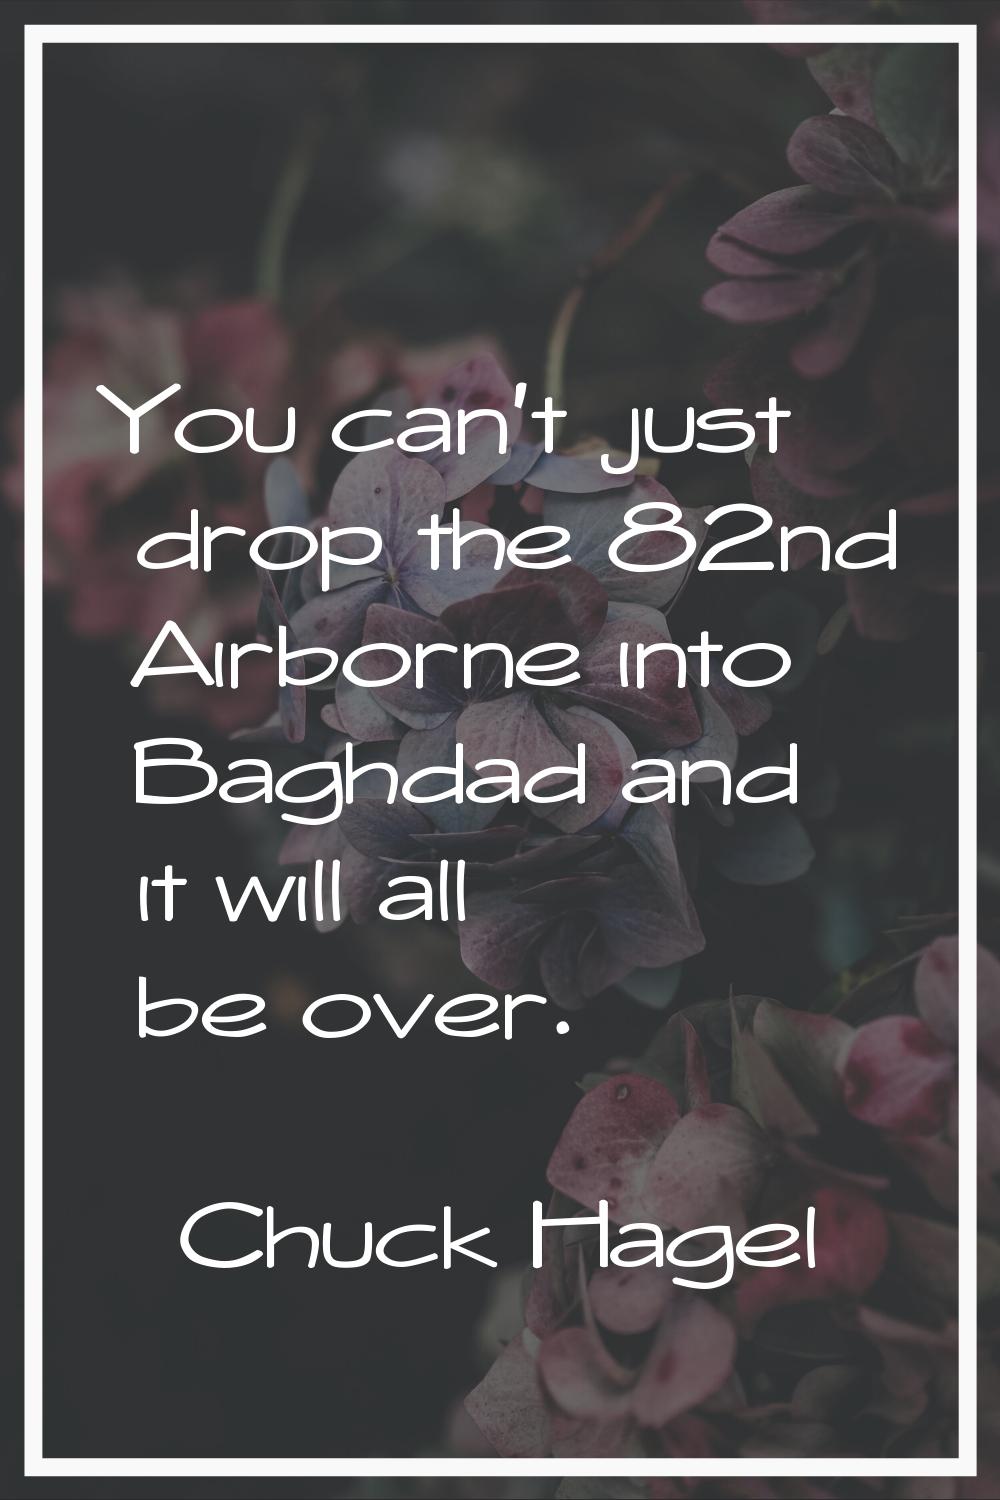 You can't just drop the 82nd Airborne into Baghdad and it will all be over.